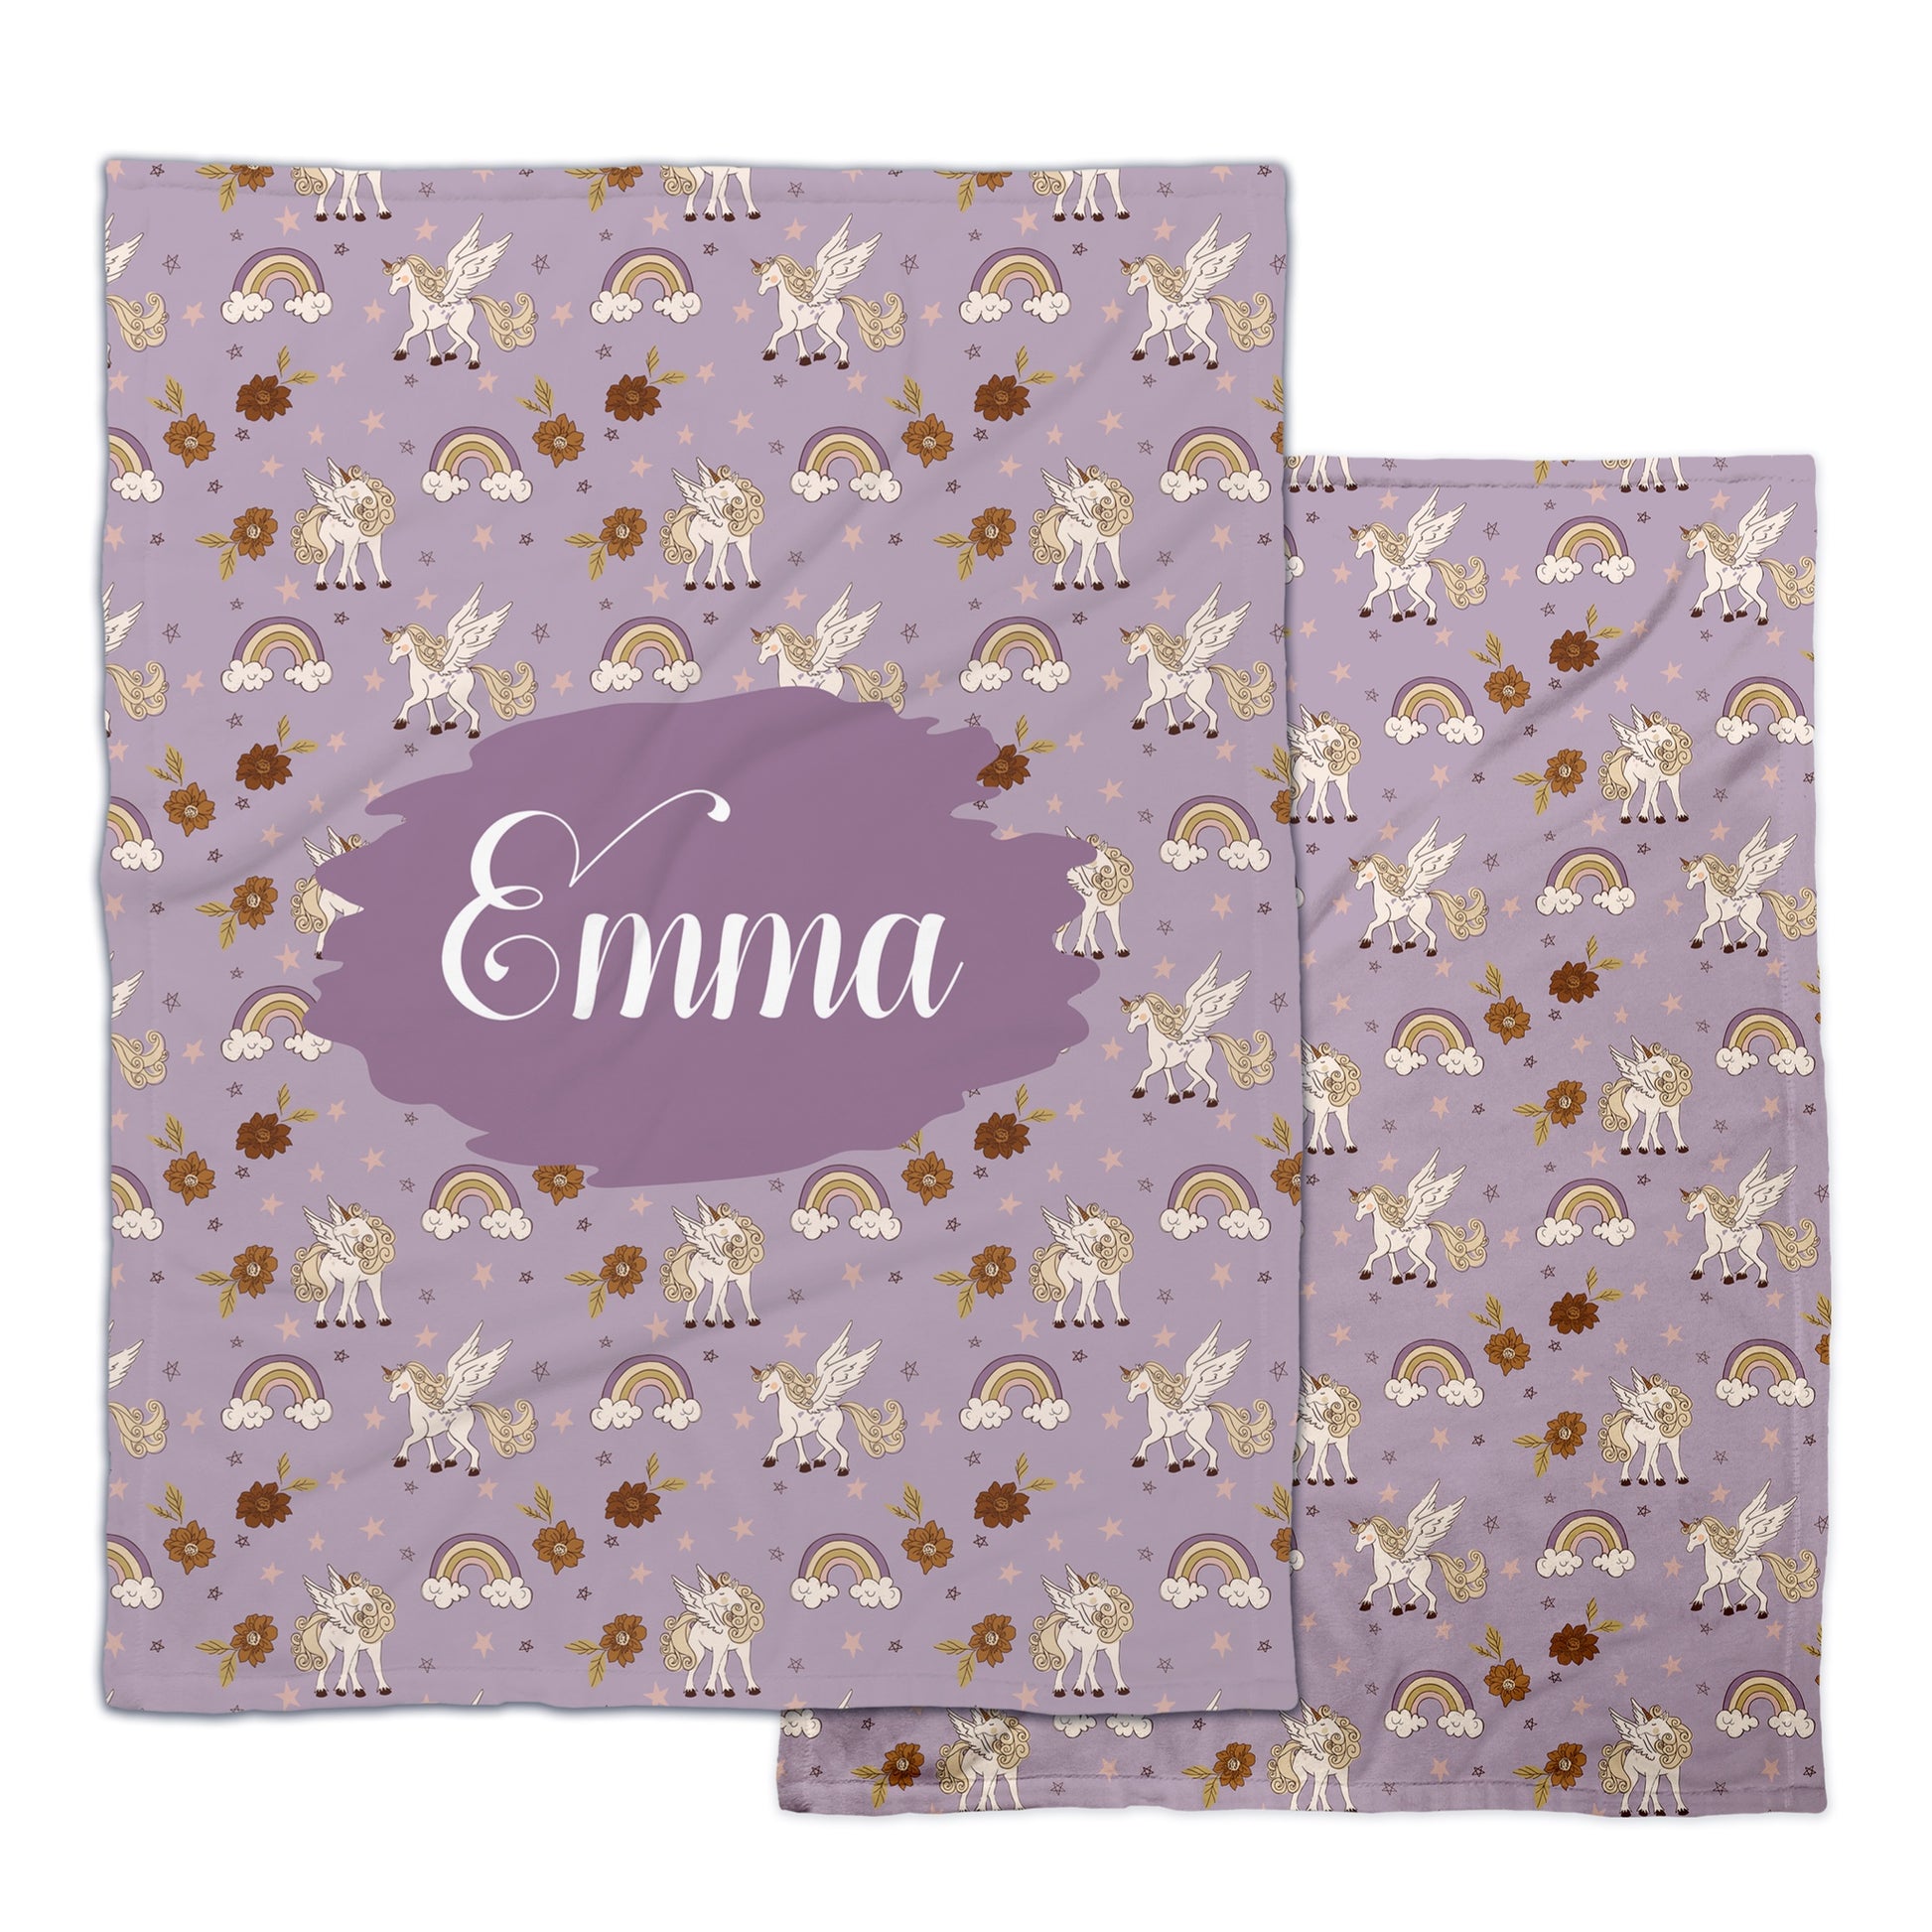 Juniper Row floral unicorn patterned fleece blankets with customizable name.